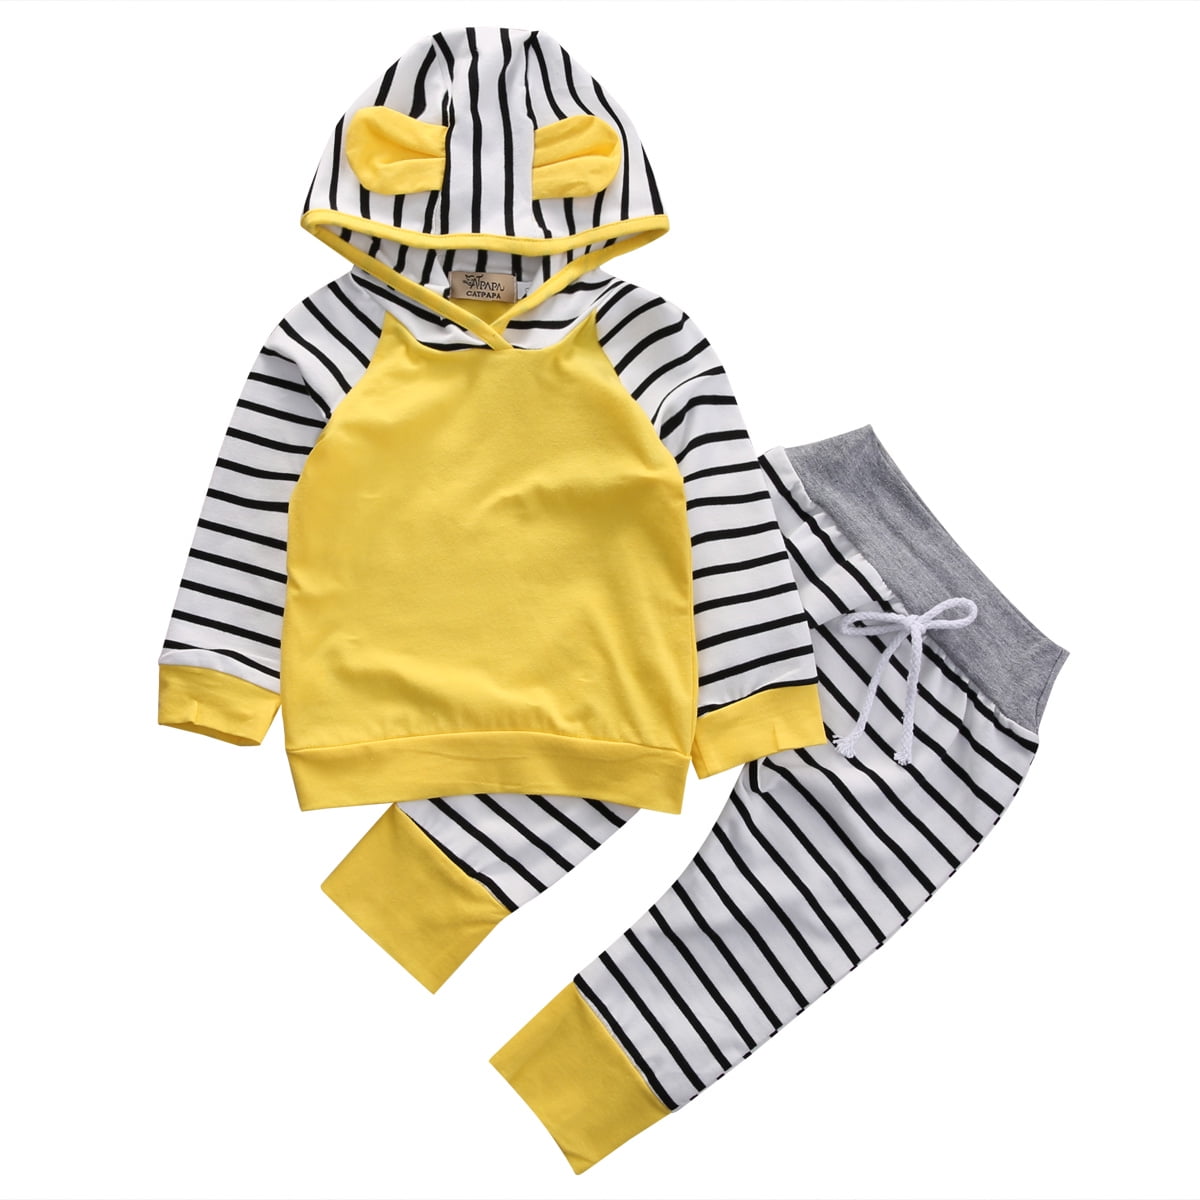 2pcs Newborn Infant Baby Boy Girls Outfits Hooded Tops+Pants Kids Clothes Set 